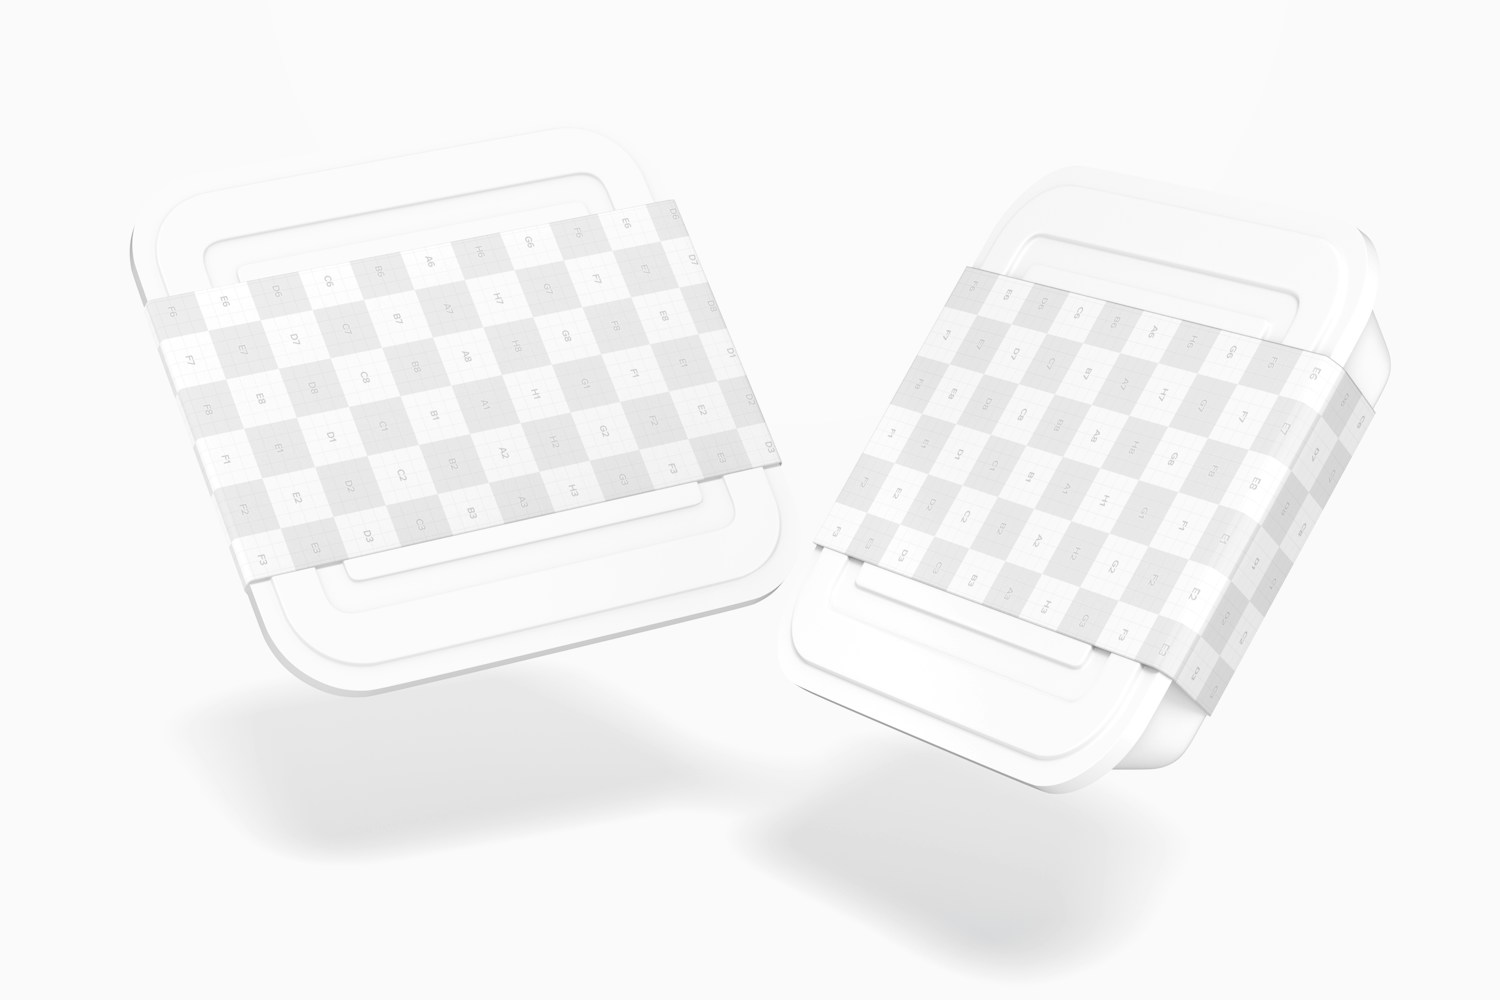 Food Tray Boxes with Lid Mockup, Floating